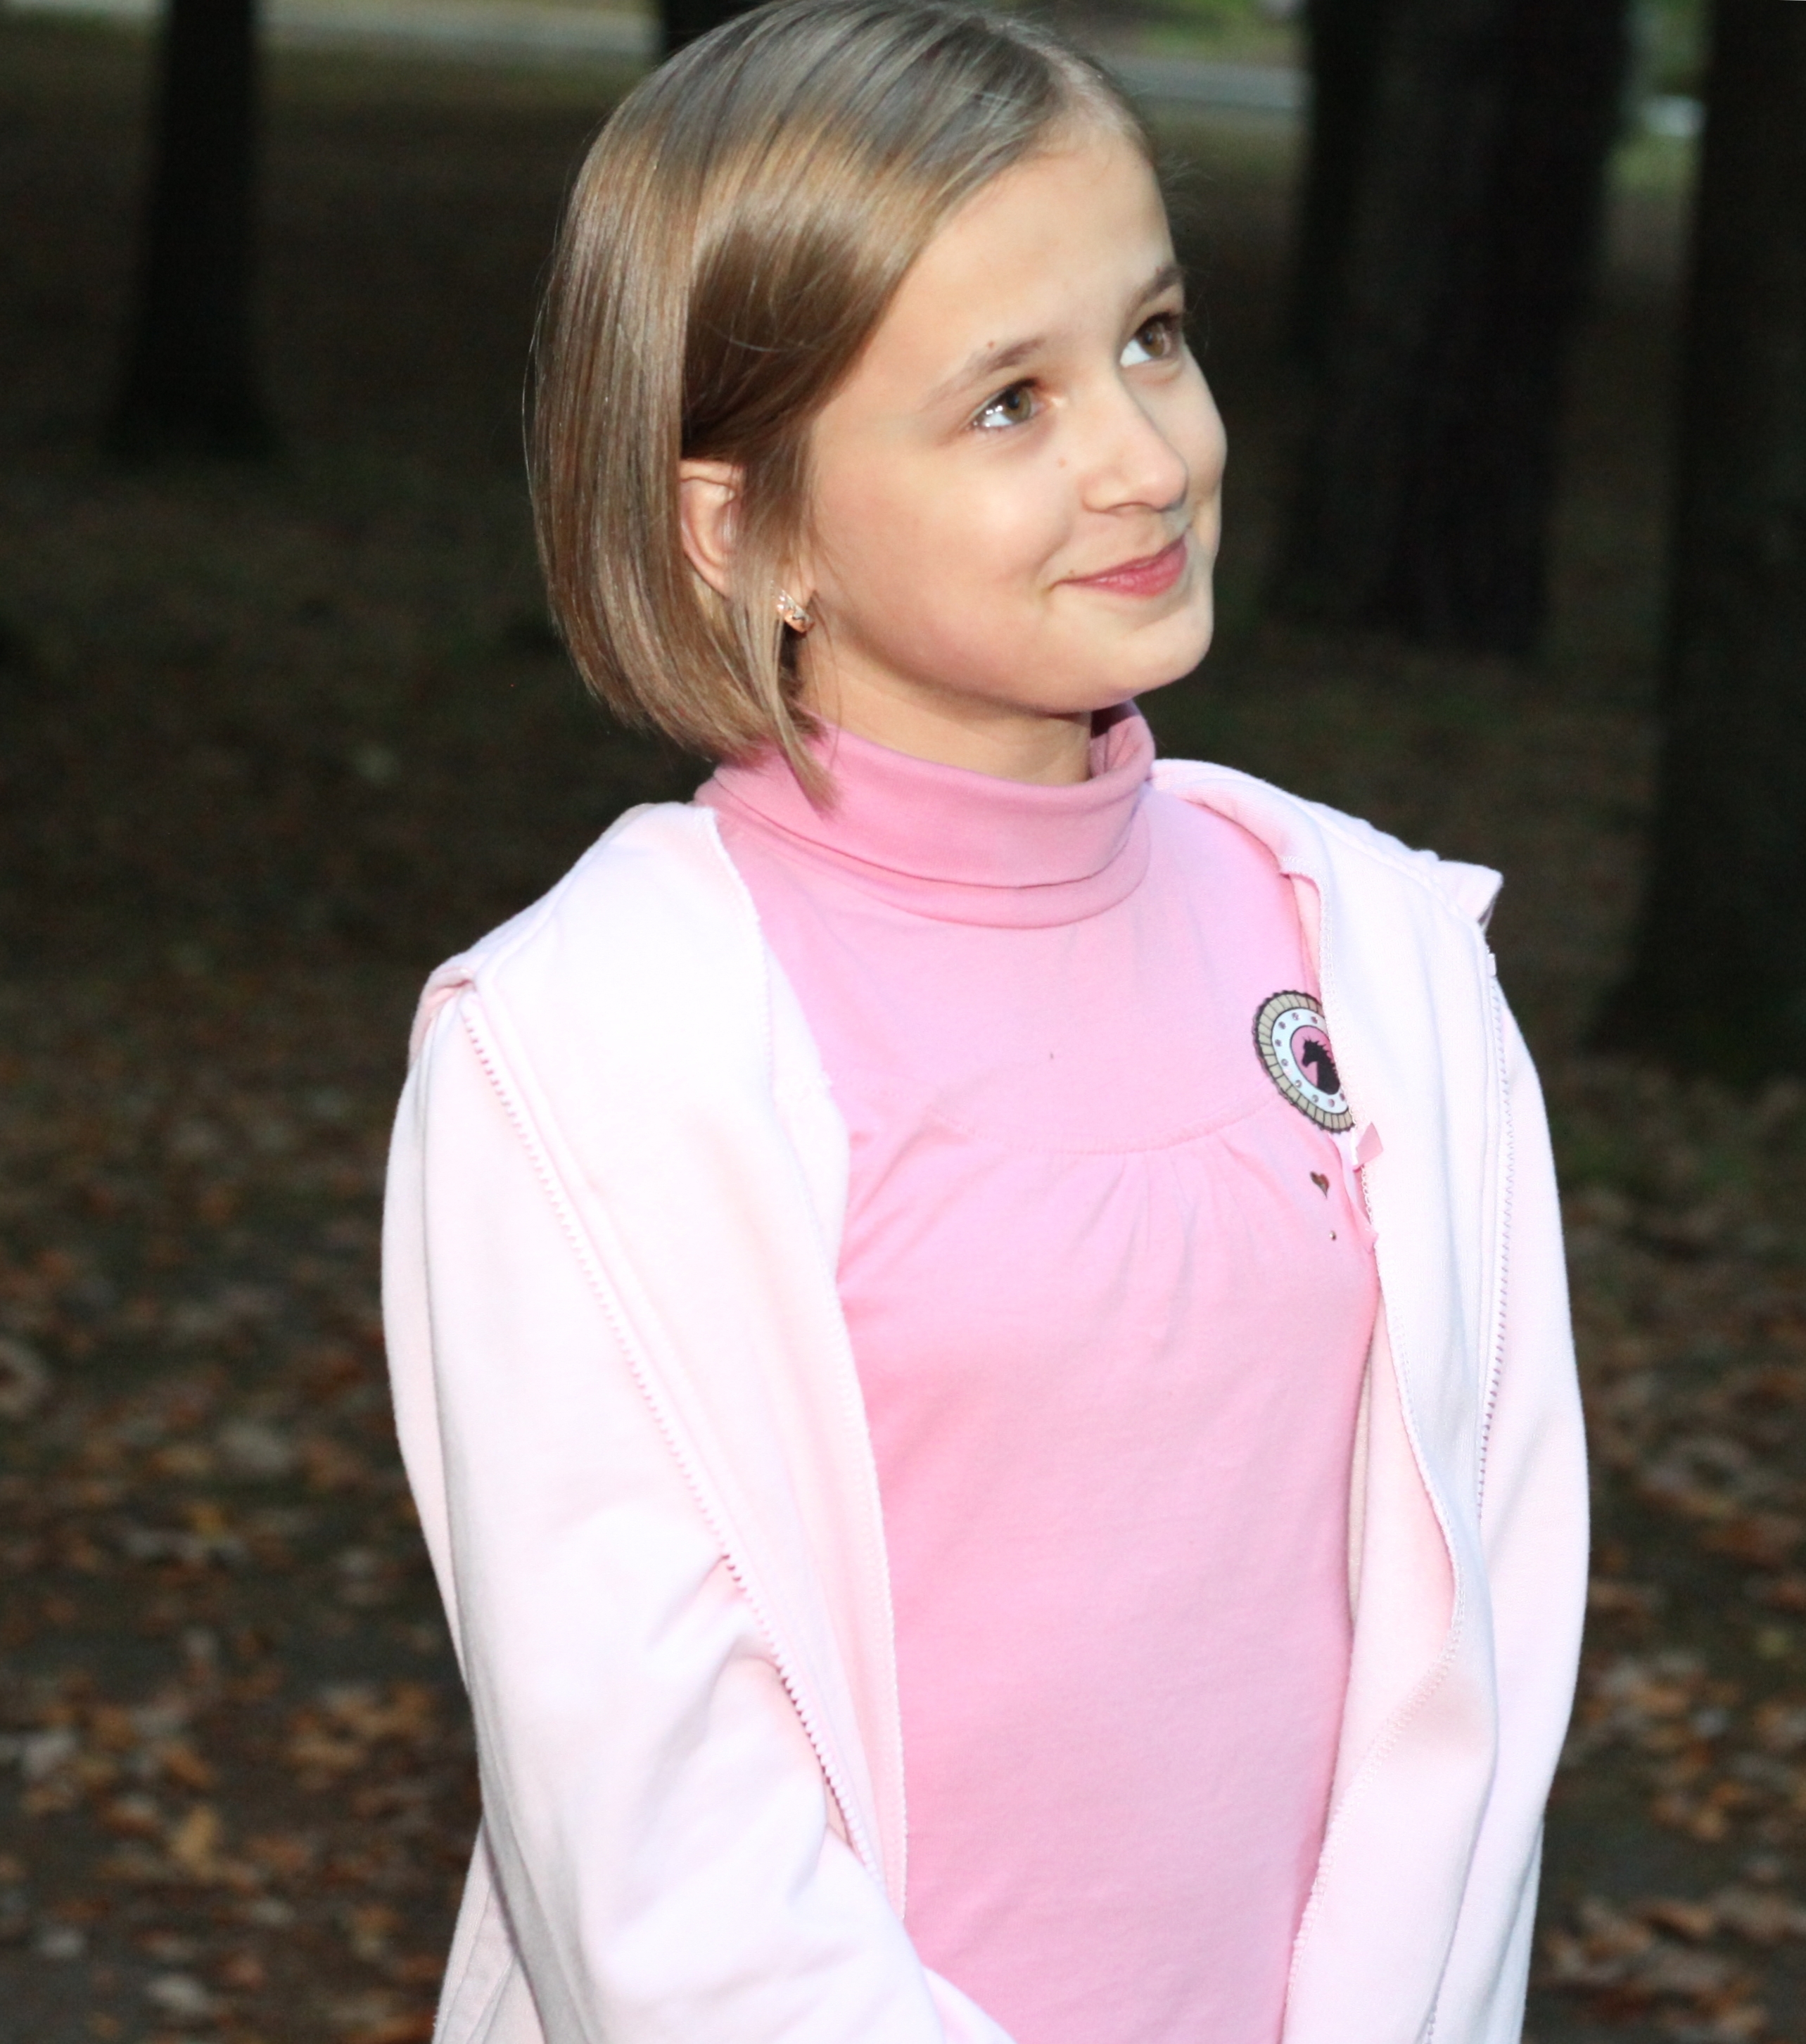 an appealing young Catholic girl in a park, picture 3